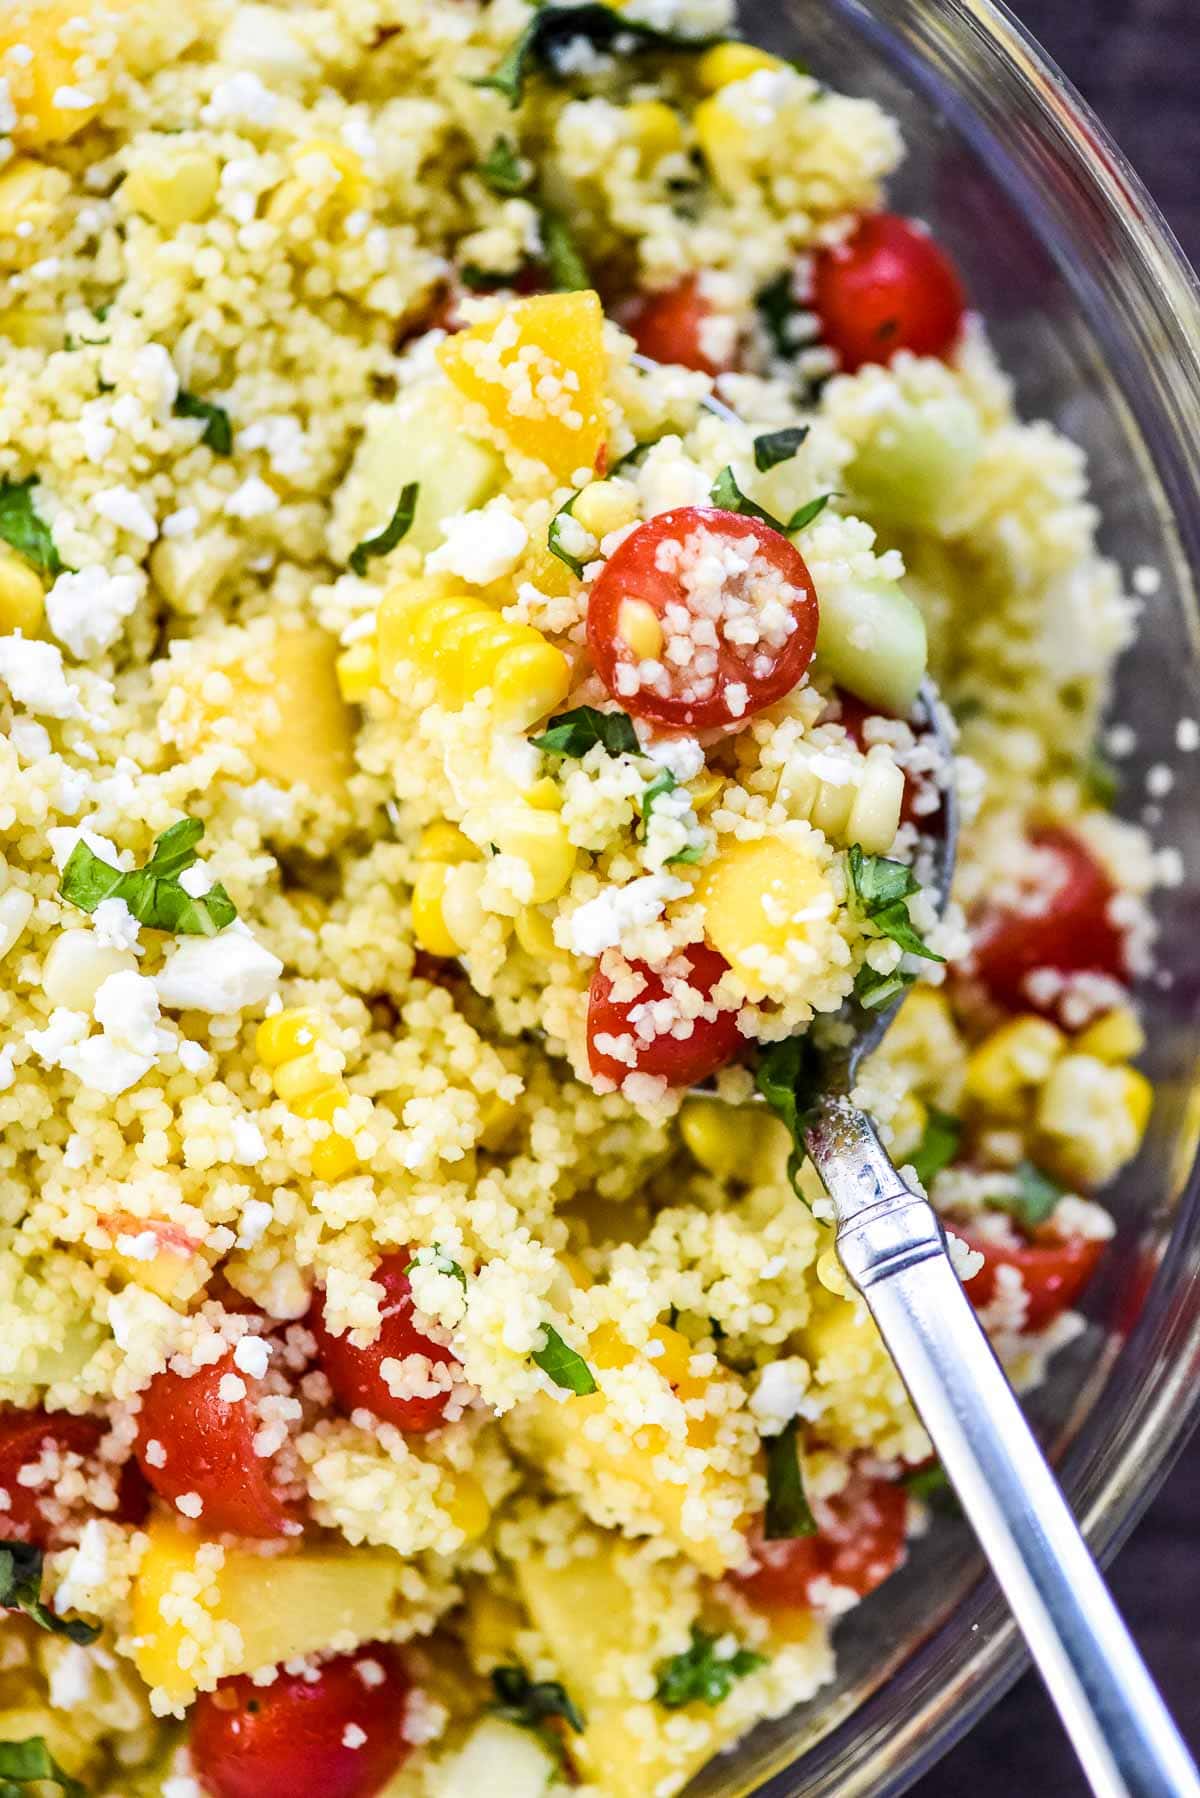 Couscous Salad being scooped up by spoon.